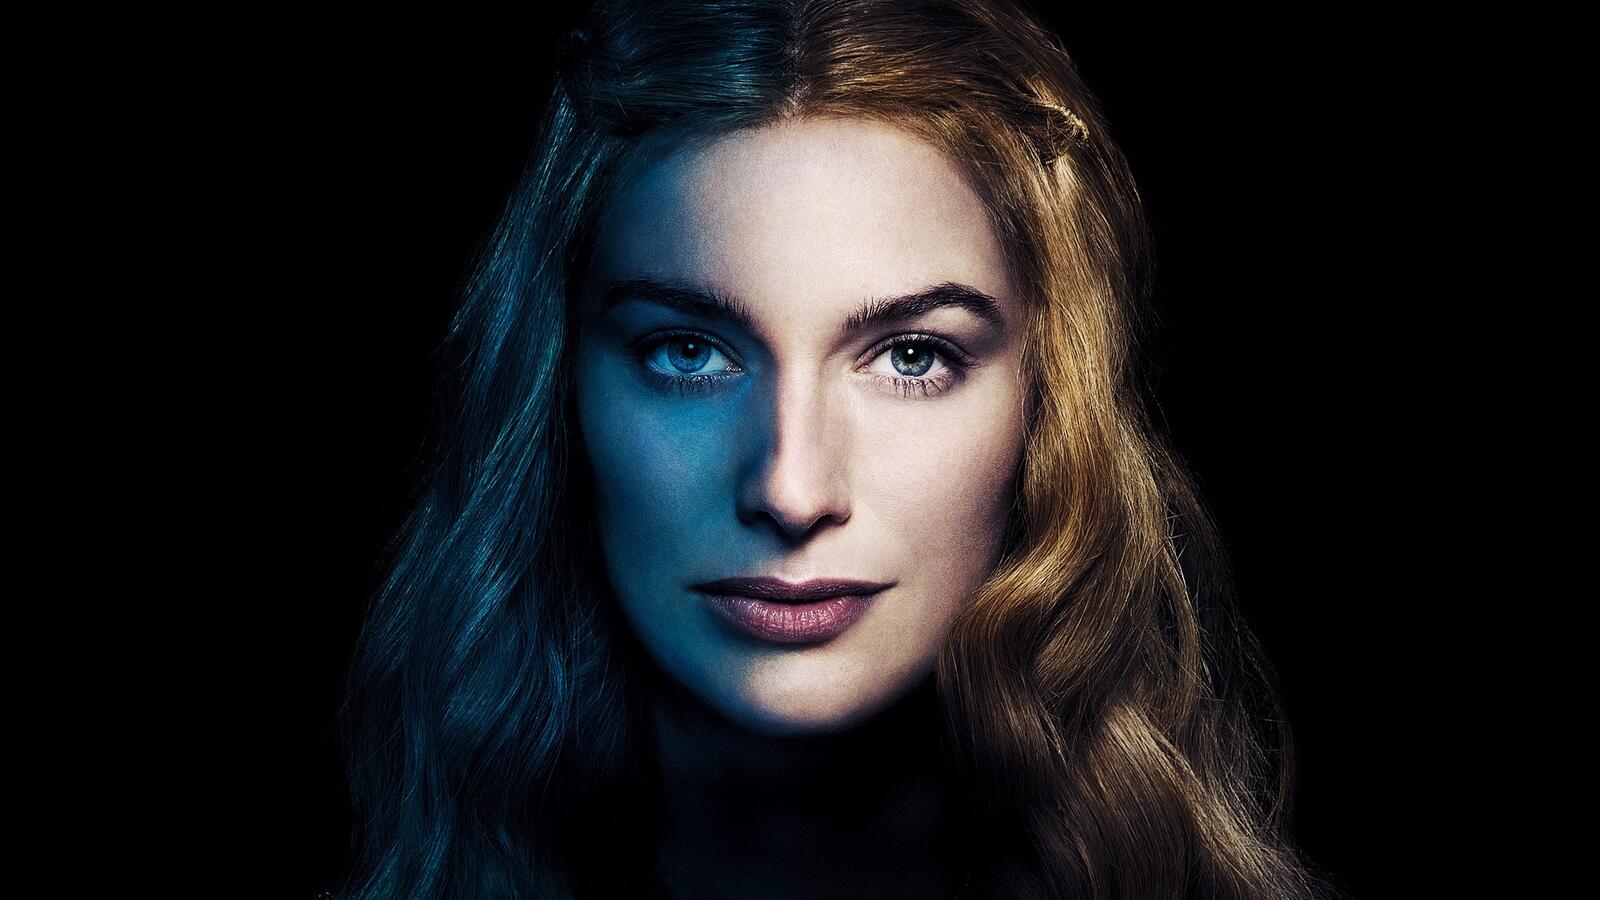 Wallpapers cersei lannister Game Of Thrones TV shows on the desktop